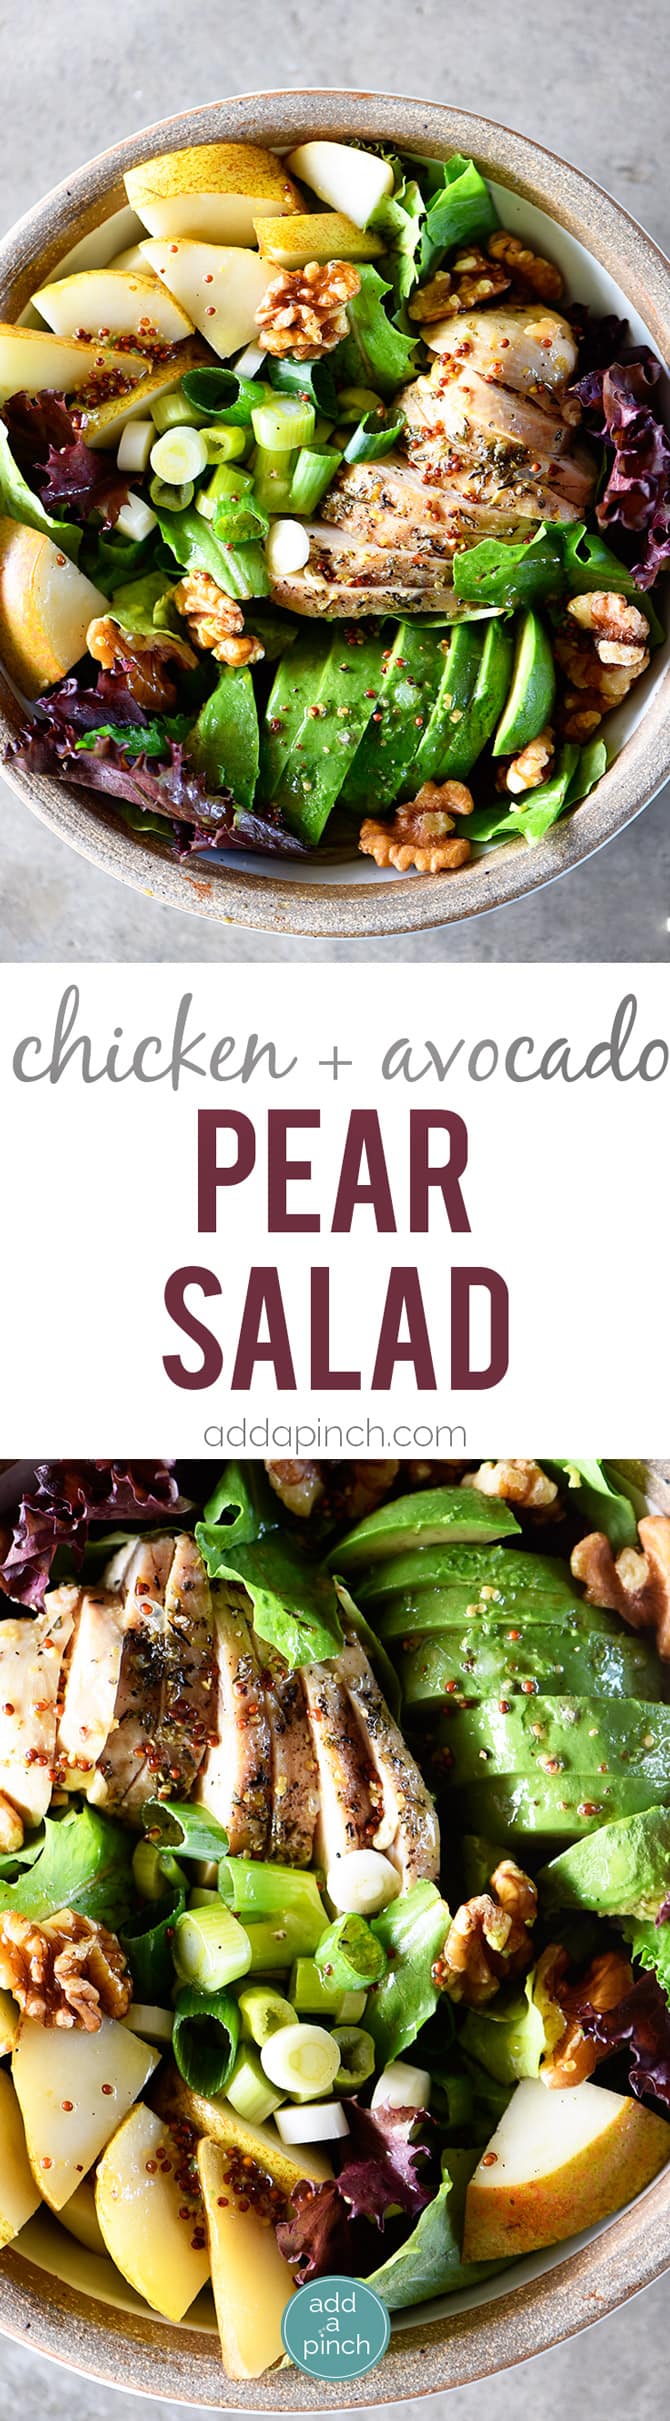 Fall Chicken Avocado Pear Salad Recipe - This salad makes for a delicious fall salad recipe! Filled with chicken, avocado, pears, walnuts, and topped with a Honey Mustard Dressing! // addapinch.com